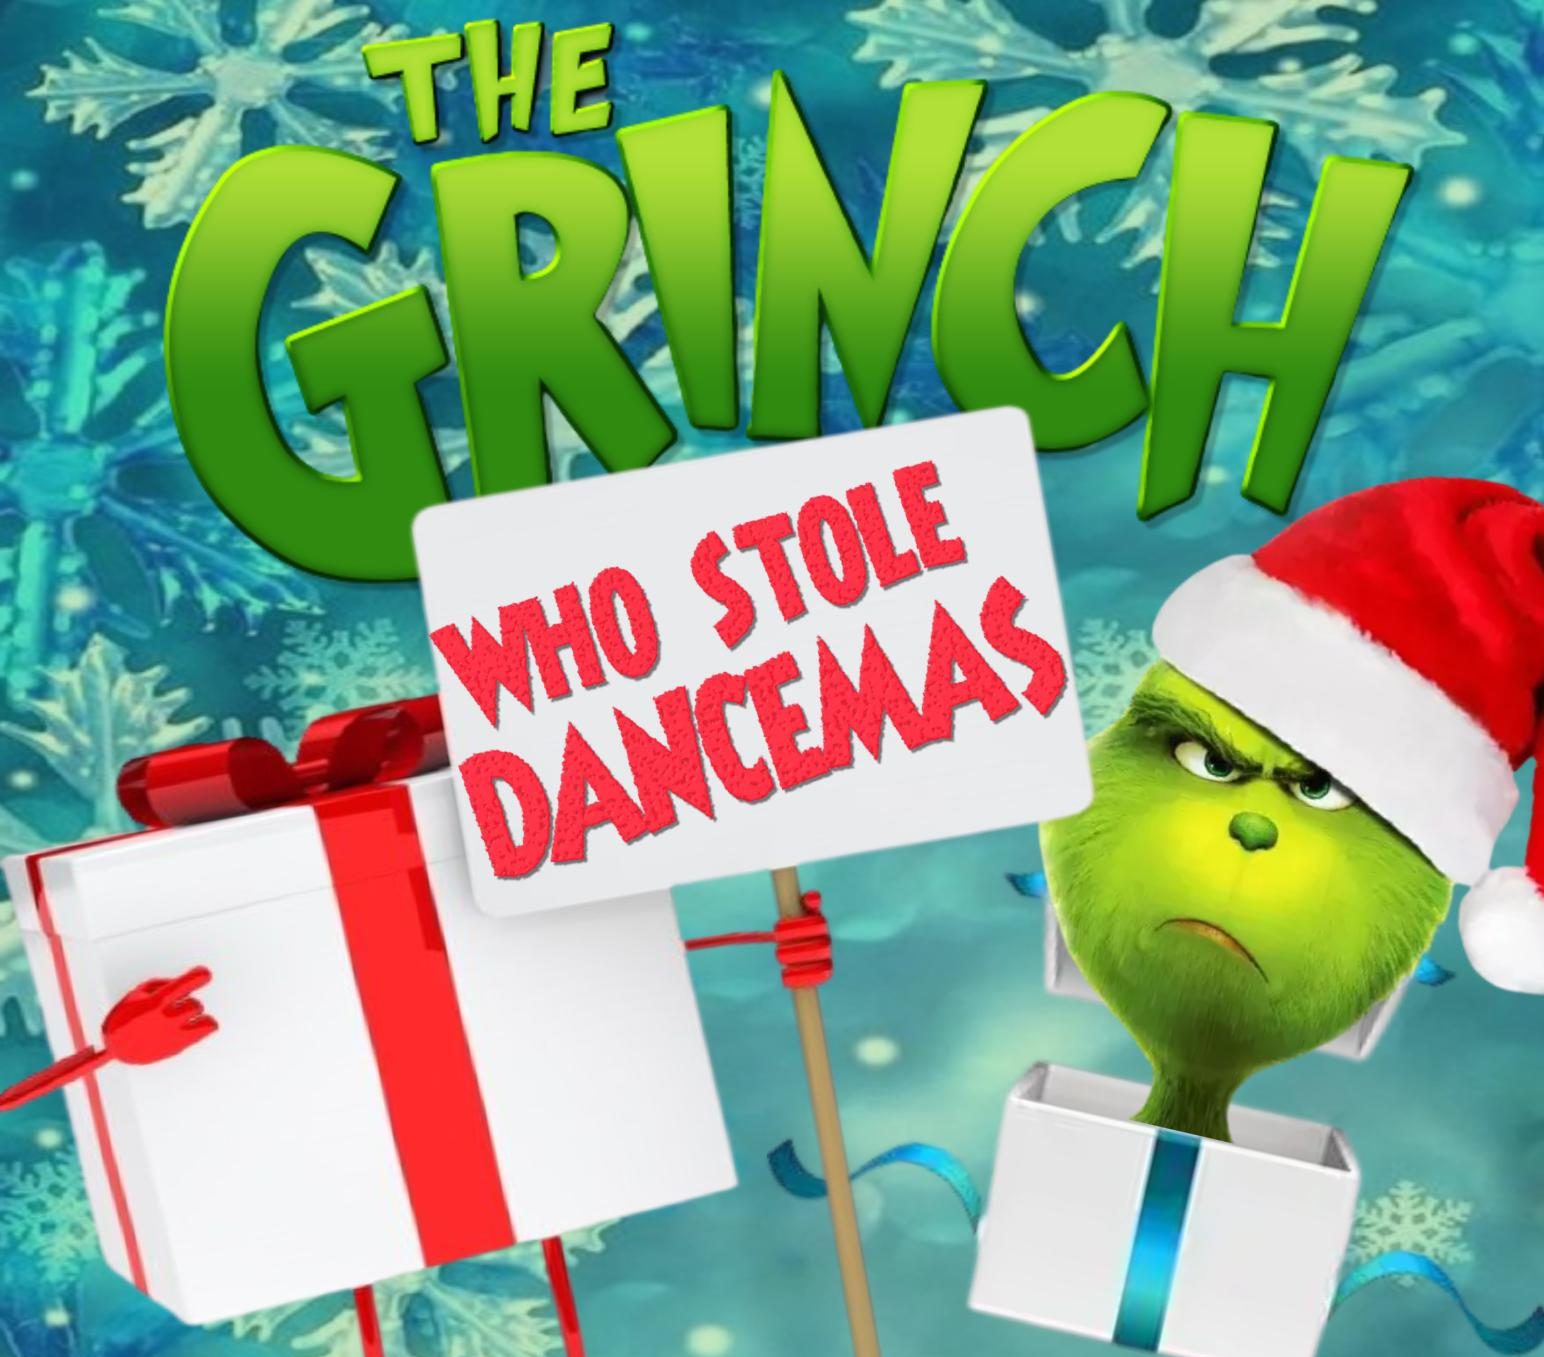 The Grinch Who Stole Dancemas poster. The event will be held in the PAC on Saturday.